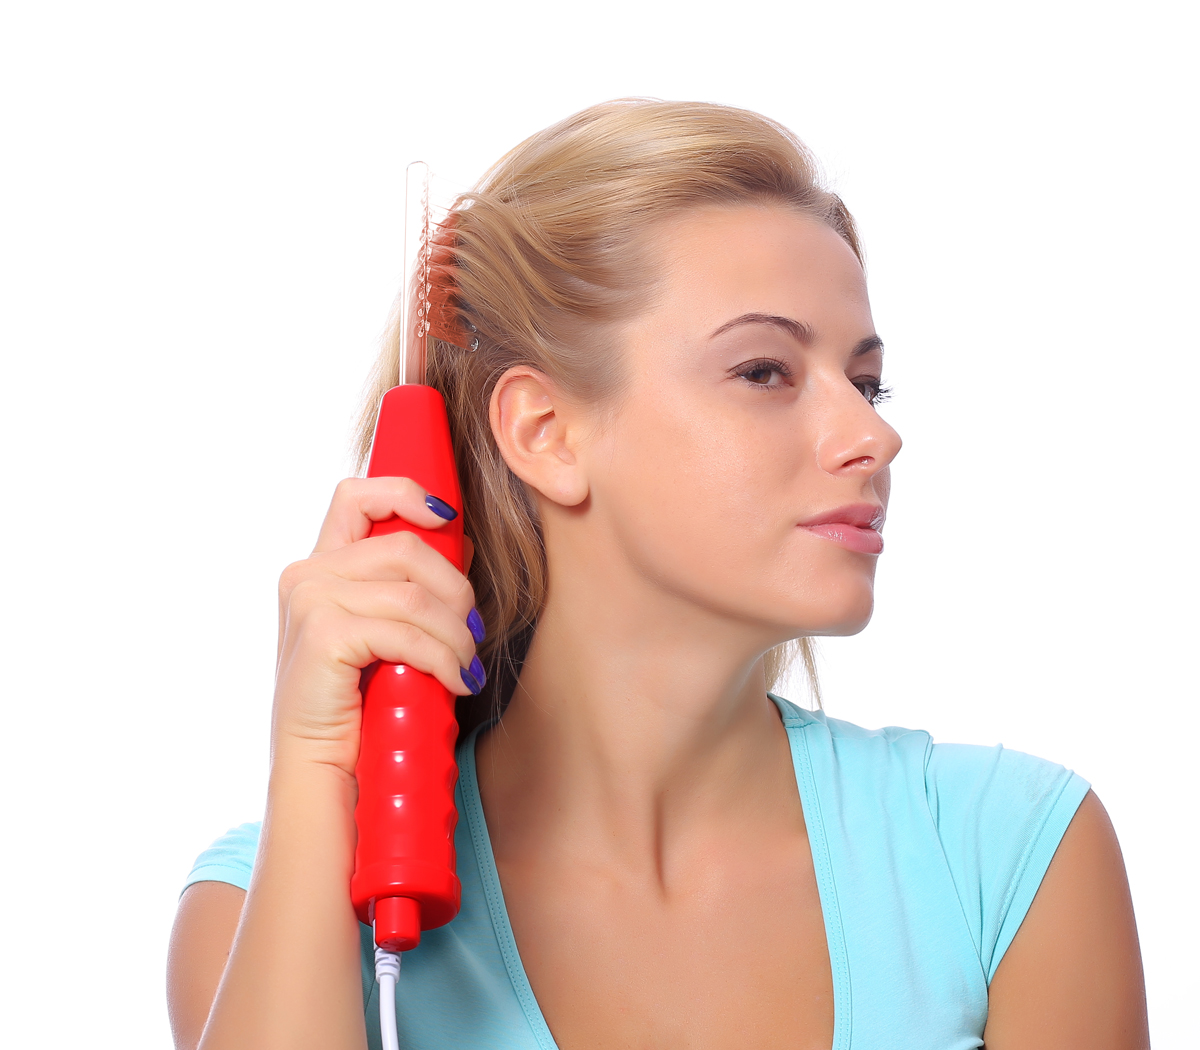 High-Frequency home use device used to make hair fuller and stronger prevent hairloss